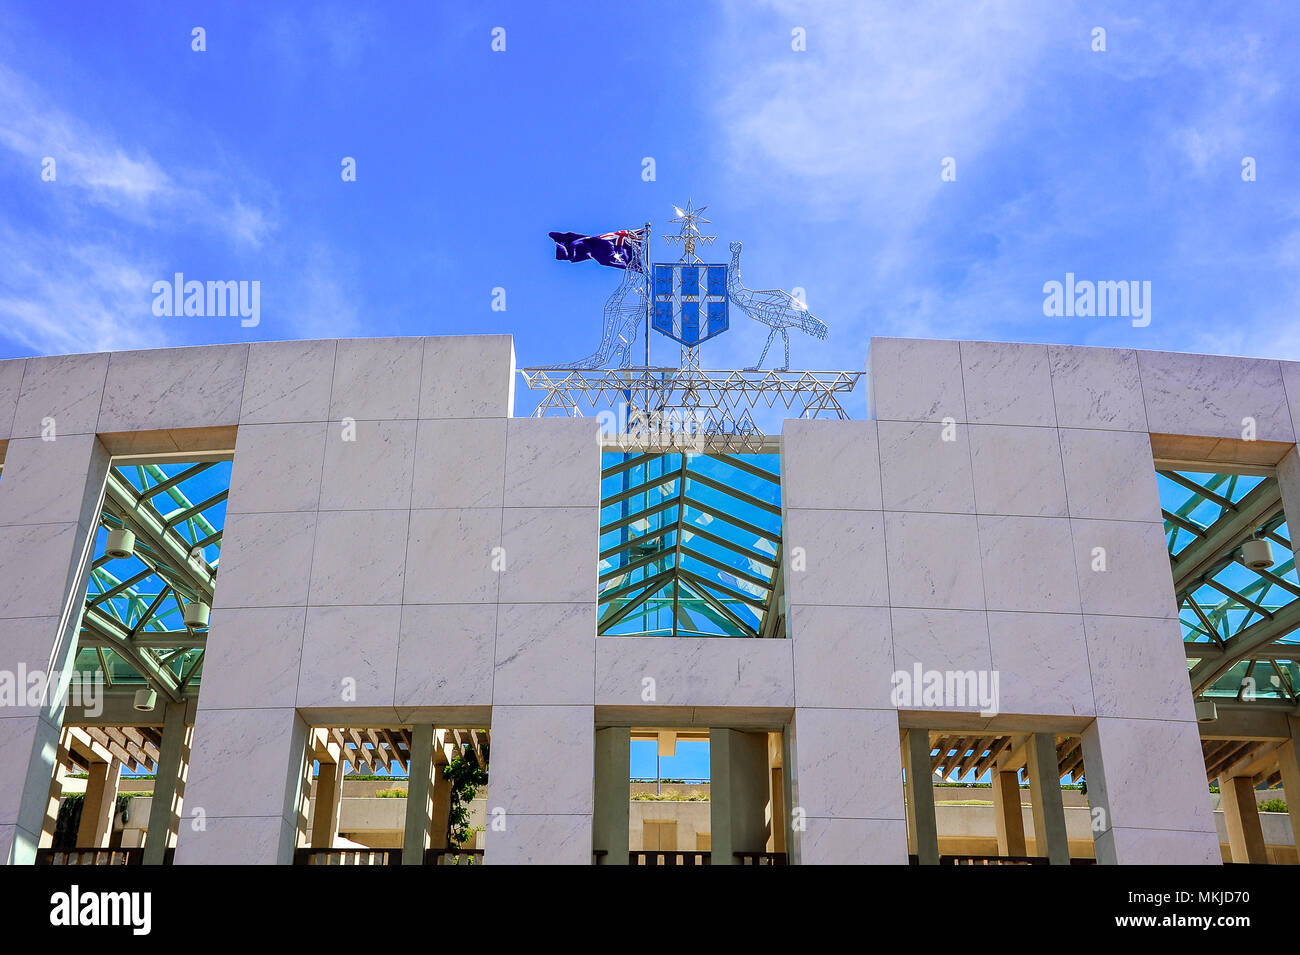 Main entrance to New Parliament House, with the coat of arms displaying the kangaroo, emu and Commonwealth star against a deep blue sky Stock Photo